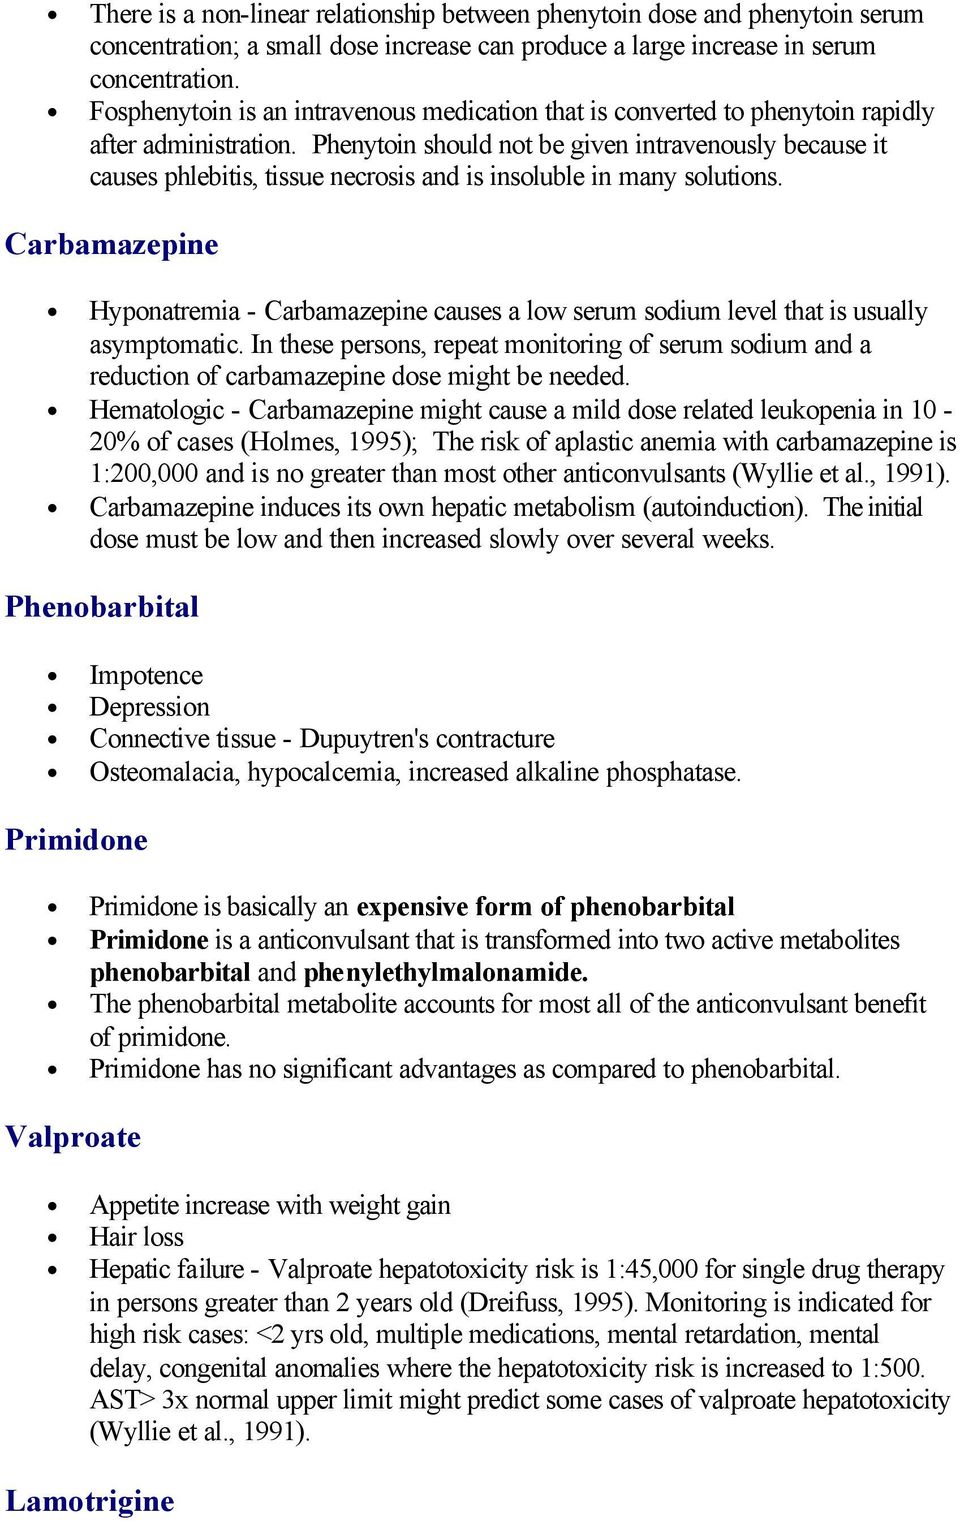 Phenytoin should not be given intravenously because it causes phlebitis, tissue necrosis and is insoluble in many solutions.